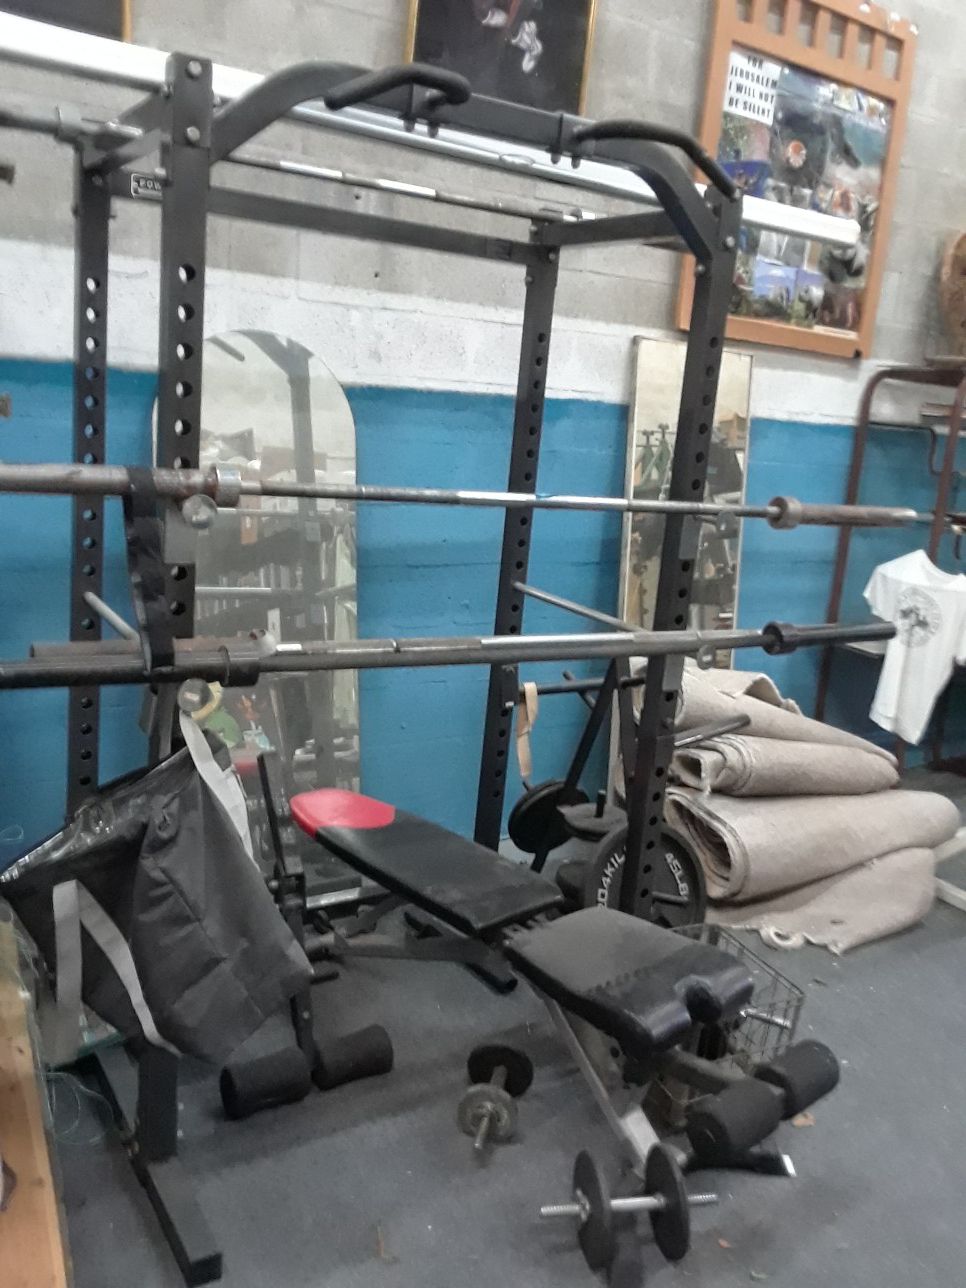 Weightlifting items for your garage